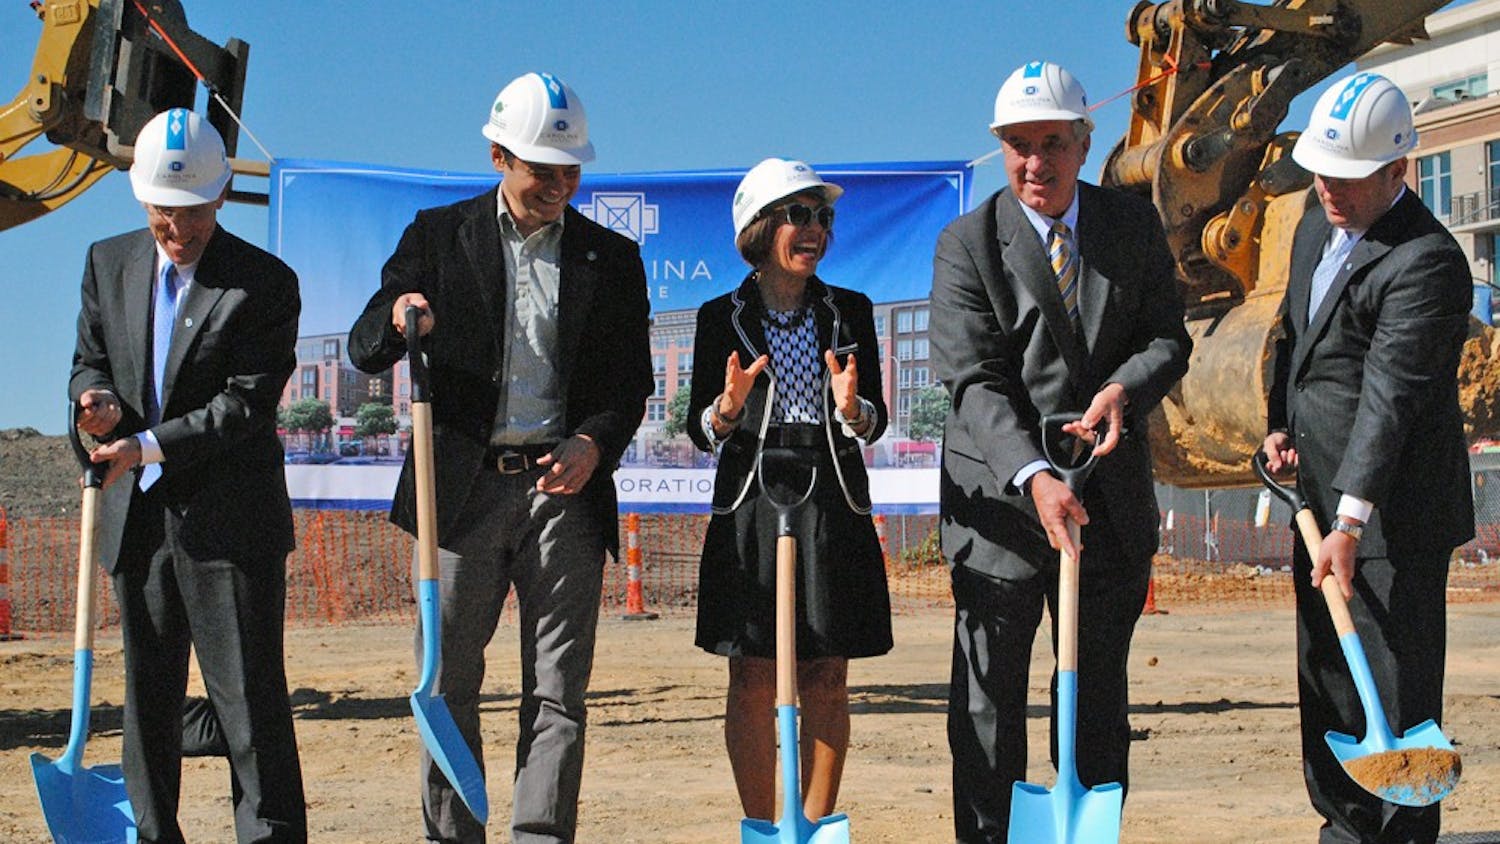 The Groundbreaking Ceremony marked the beginning of construction at Carolina Square.